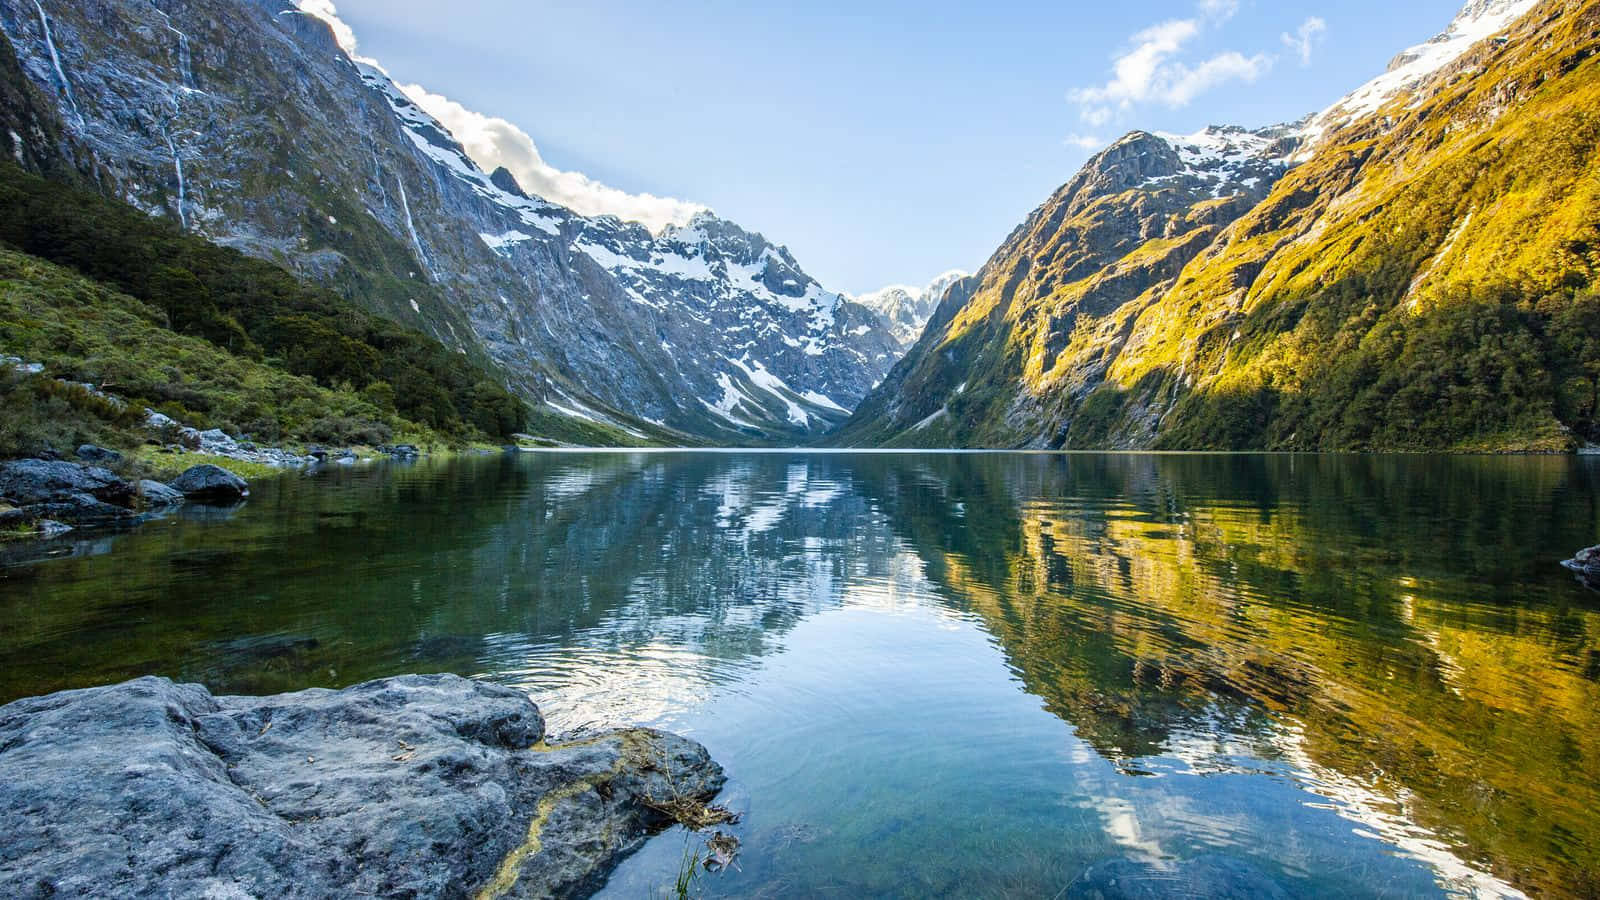 Download The Breathtaking Natural Beauty of New Zealand | Wallpapers.com